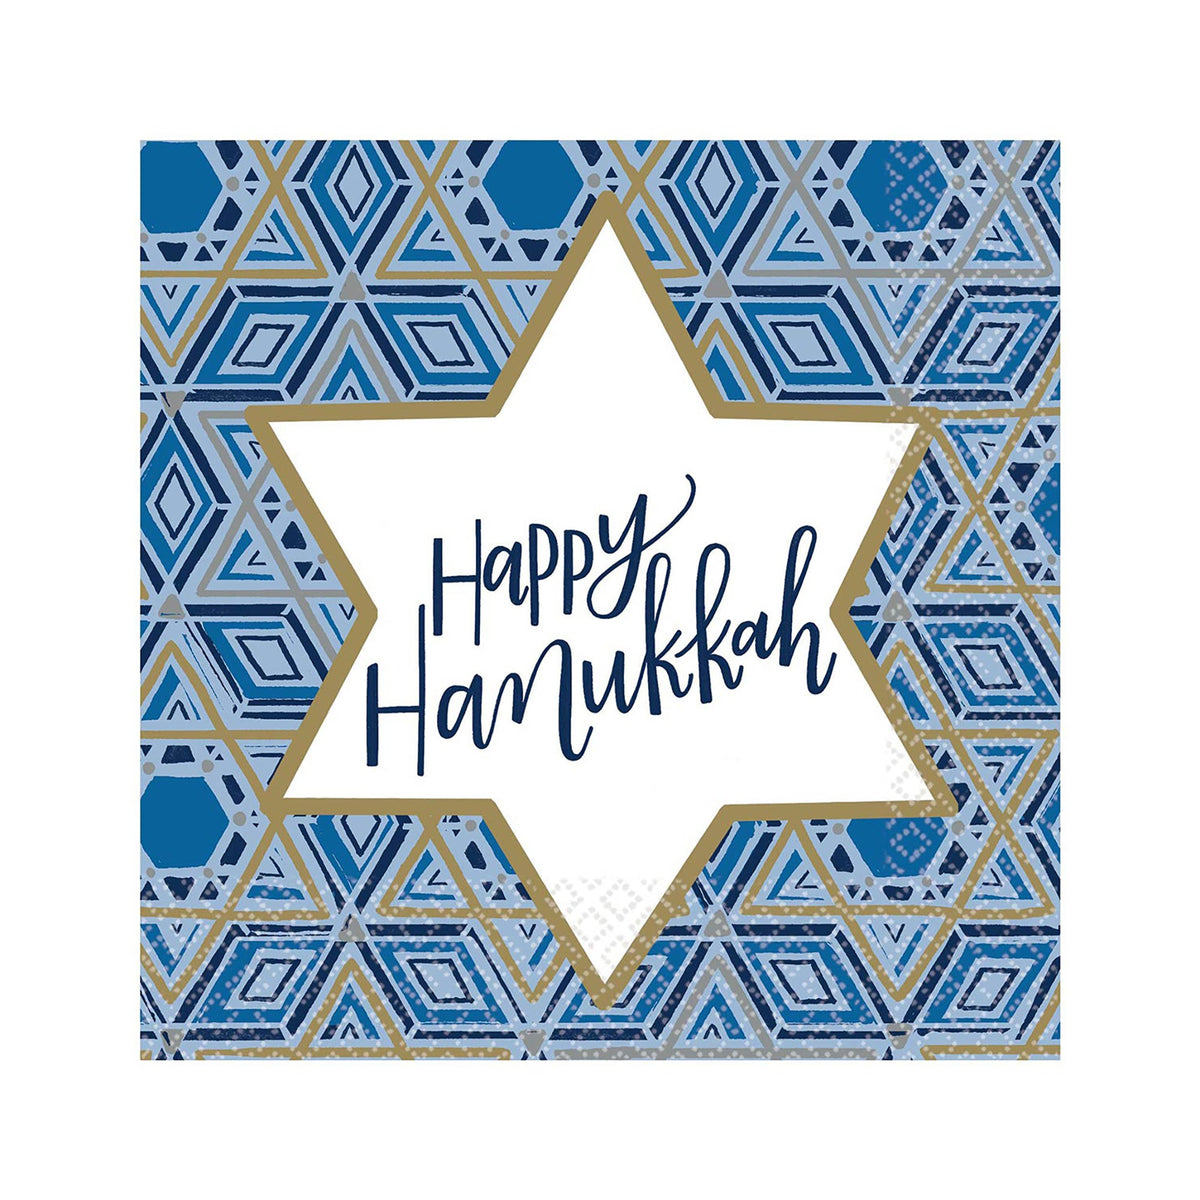 AMSCAN CA New Year Festival of Light Large "Happy Hanukkah" Lunch Napkins, 36 Count